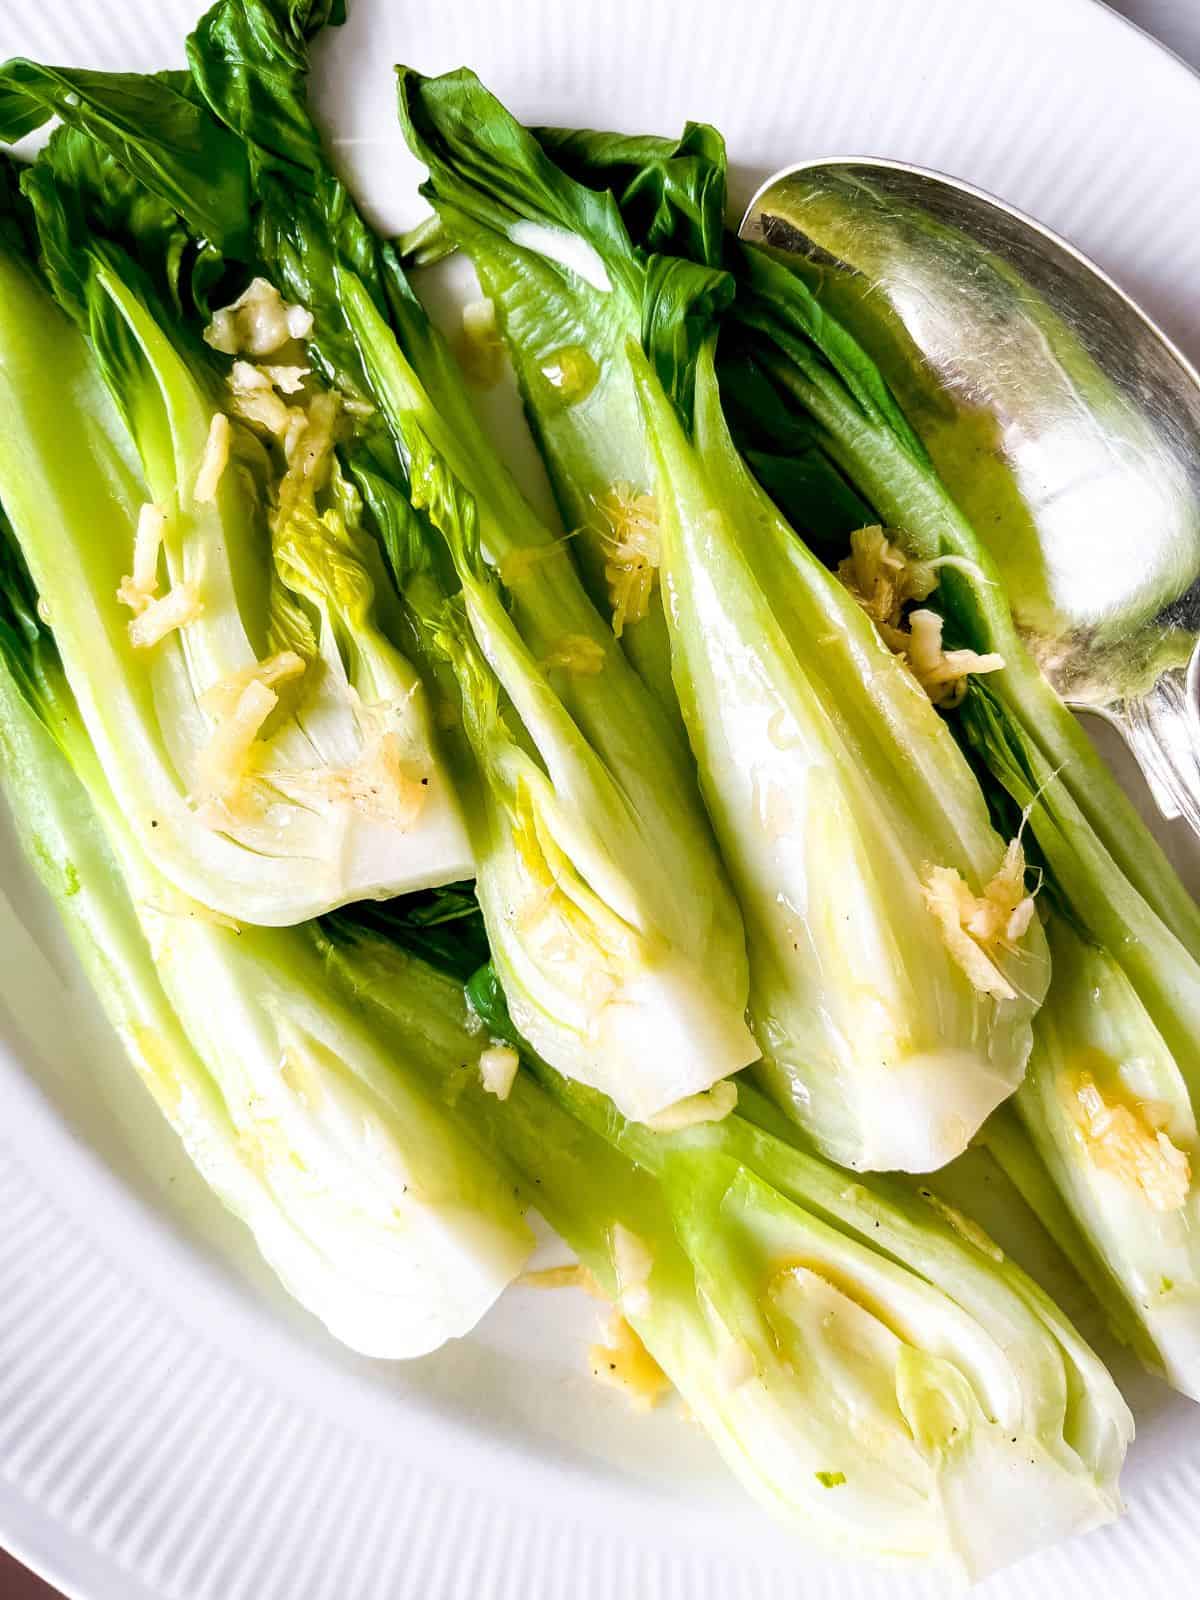 steamed pak choi on a white plate with a silver spoon.